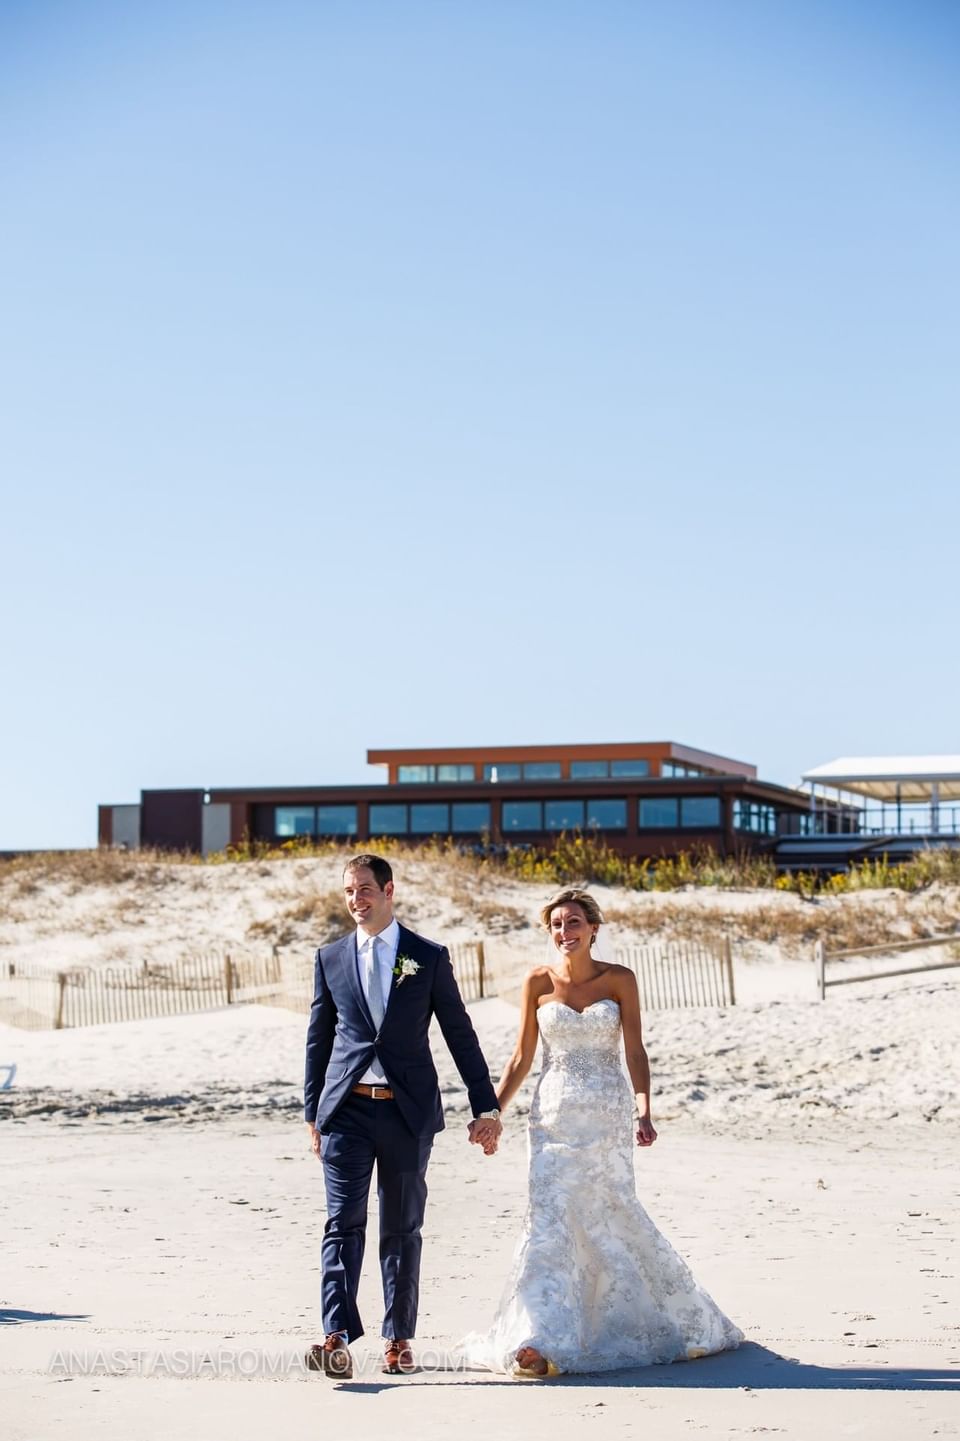 A wedded couple holding hands on the beach at ICONA Windrift